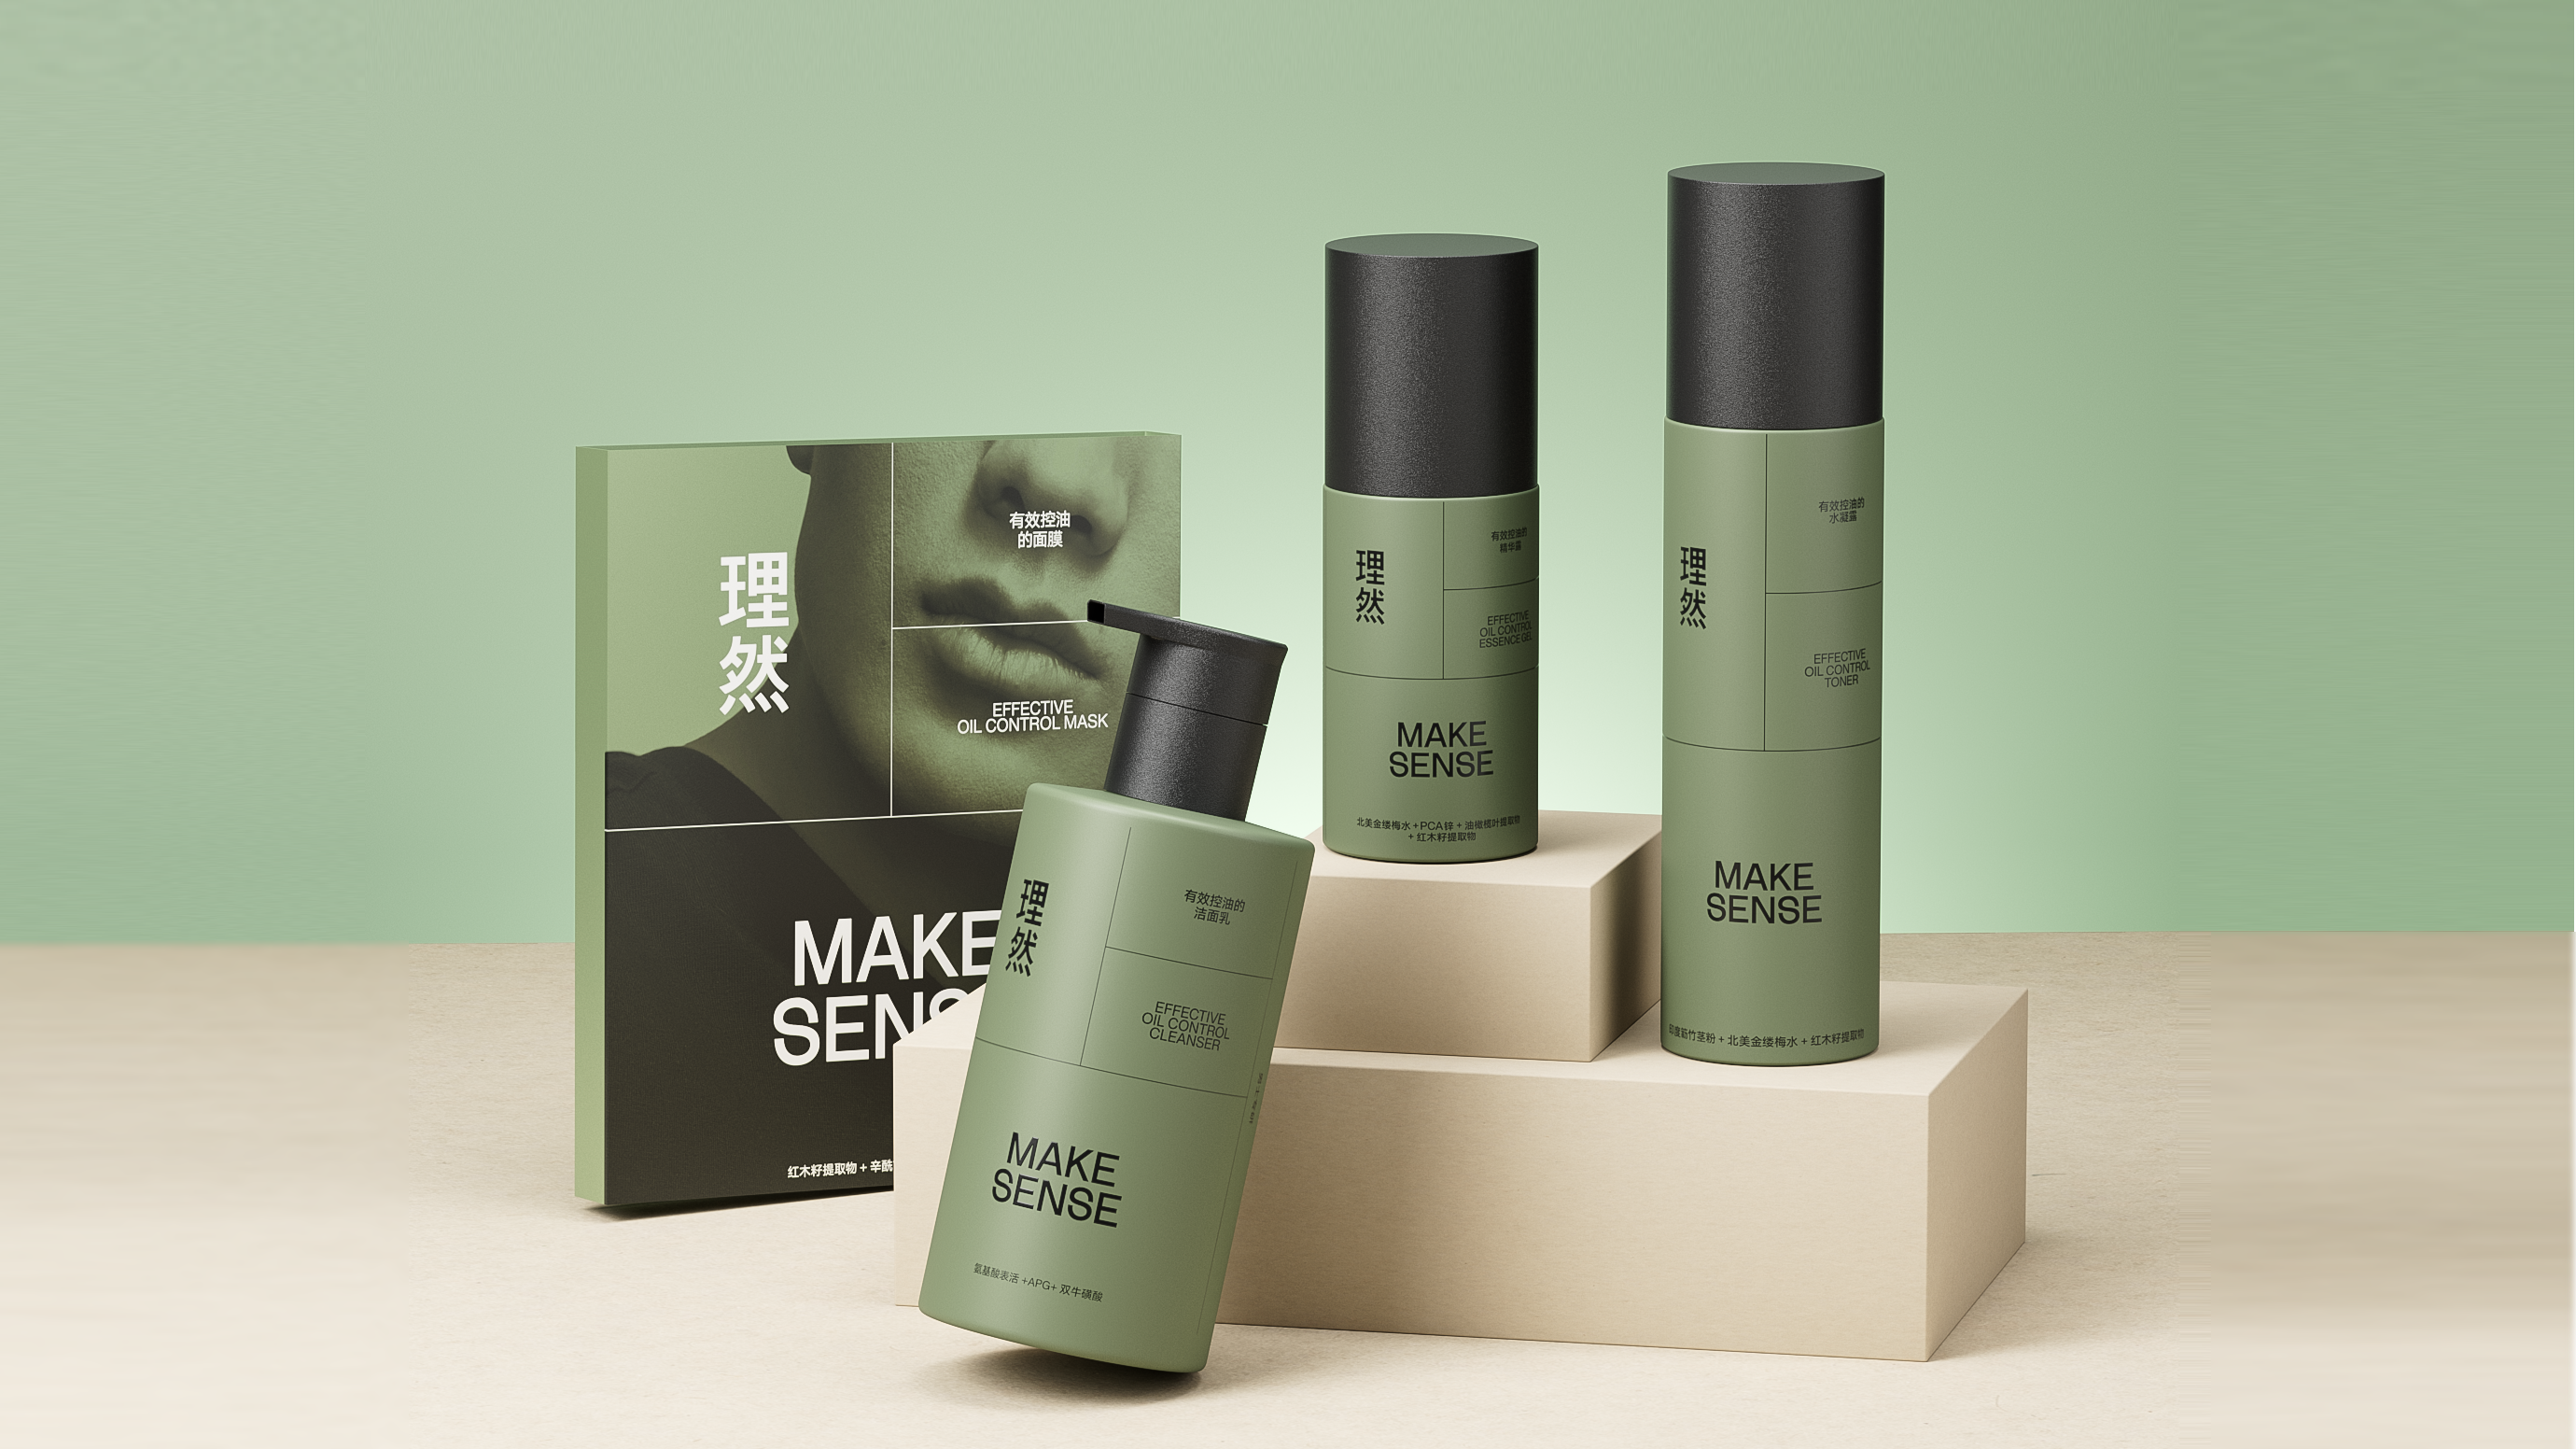 As China's men’s beauty market exceeds the $10 billion mark, here is a must-read playbook on how to take advantage of this lucrative opportunity.  Photo: Make Essense